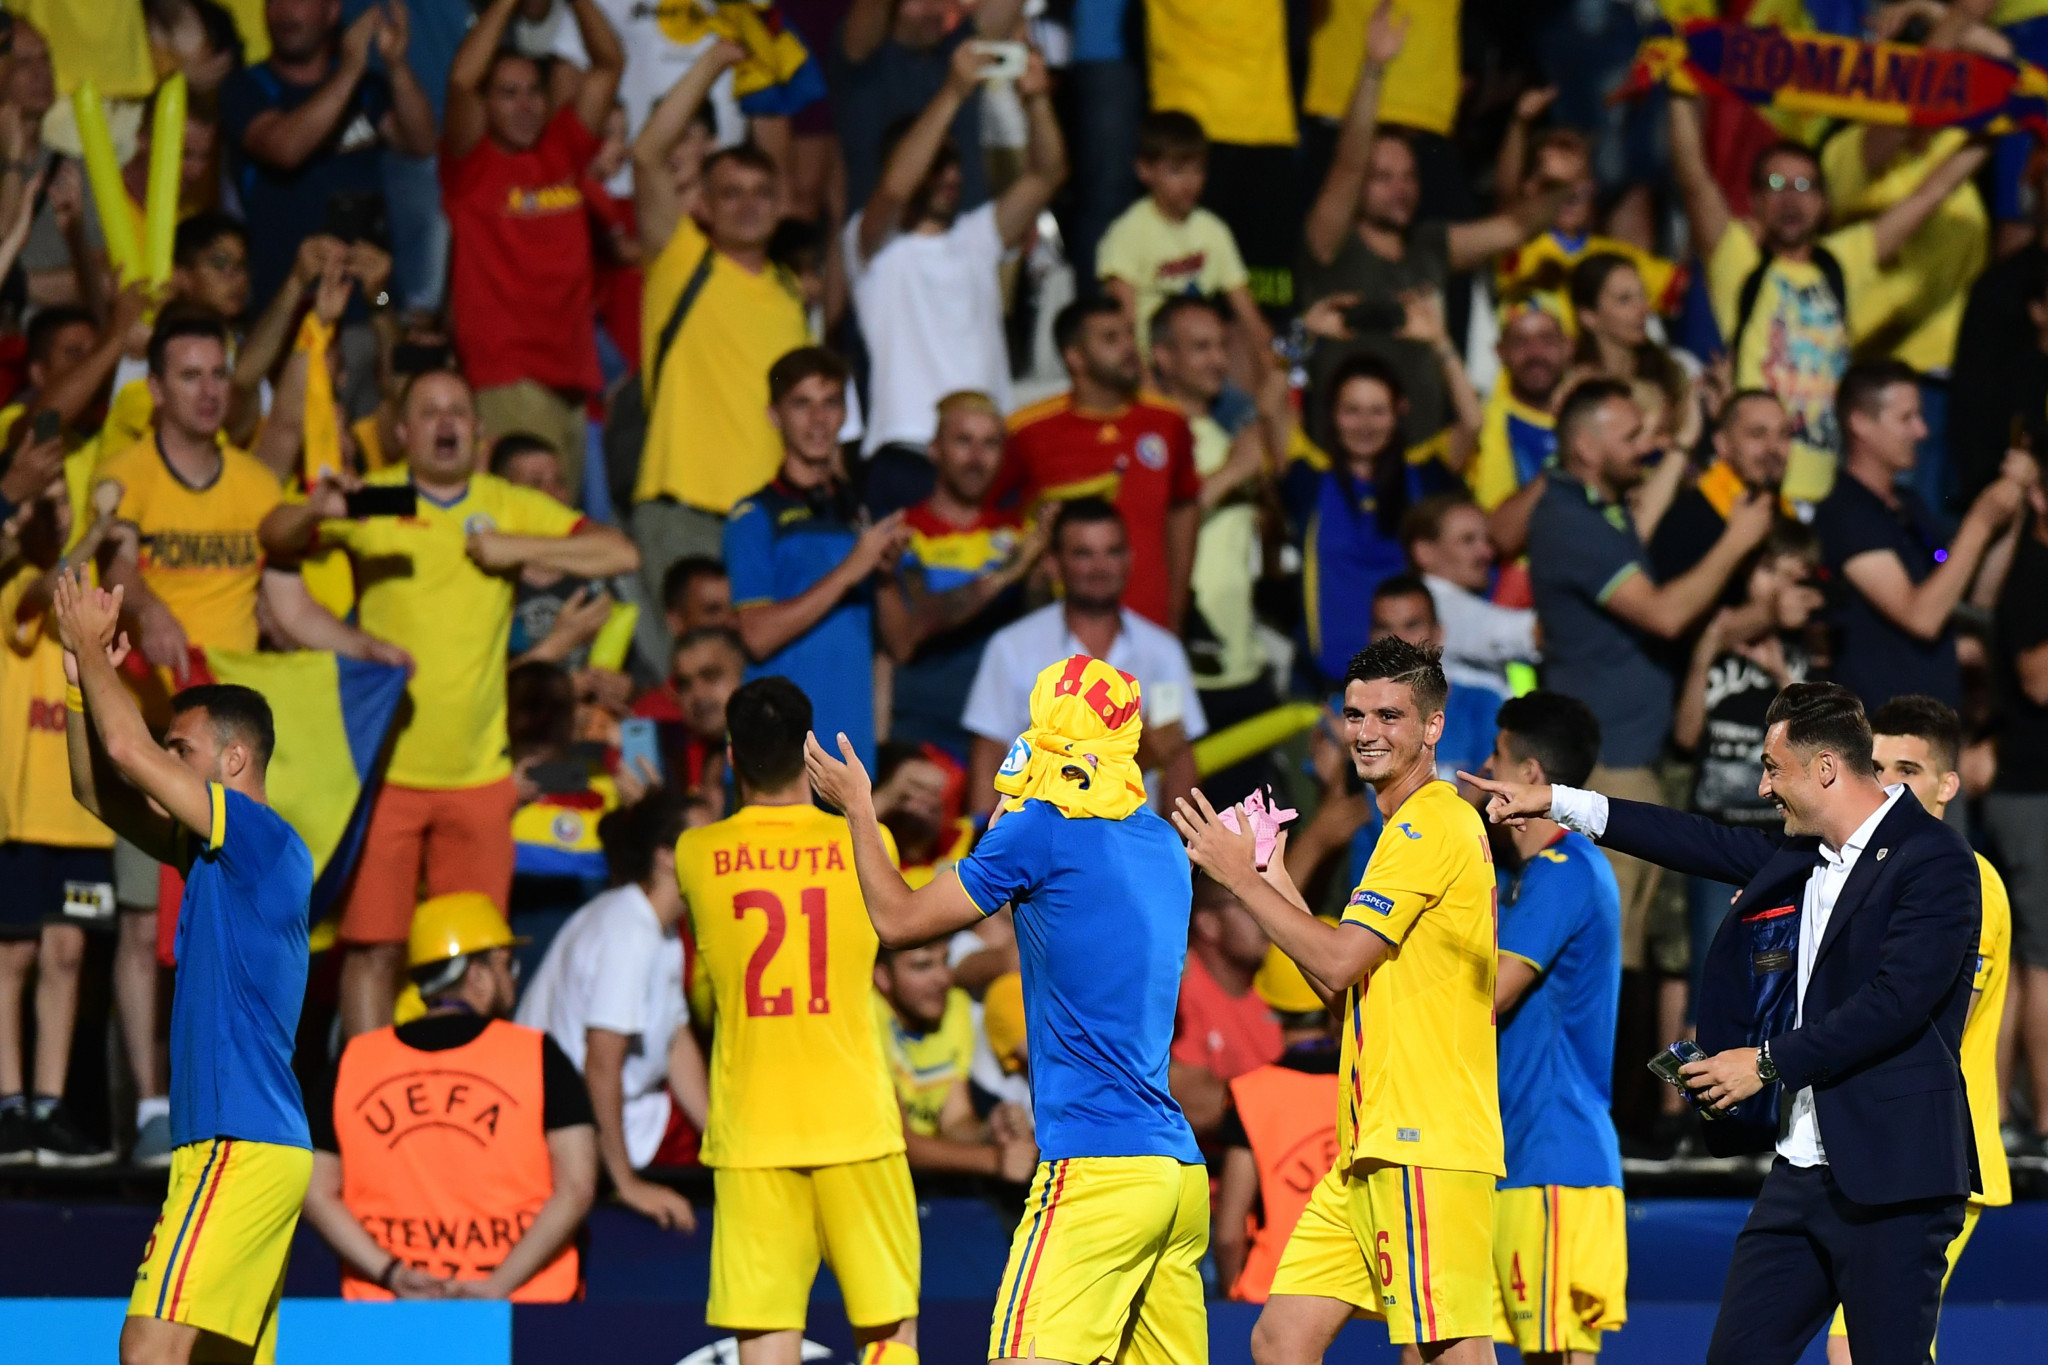 France and Romania reach Tokyo 2020 after goalless draw at UEFA European Under-21 Championships clinches semi-final spots